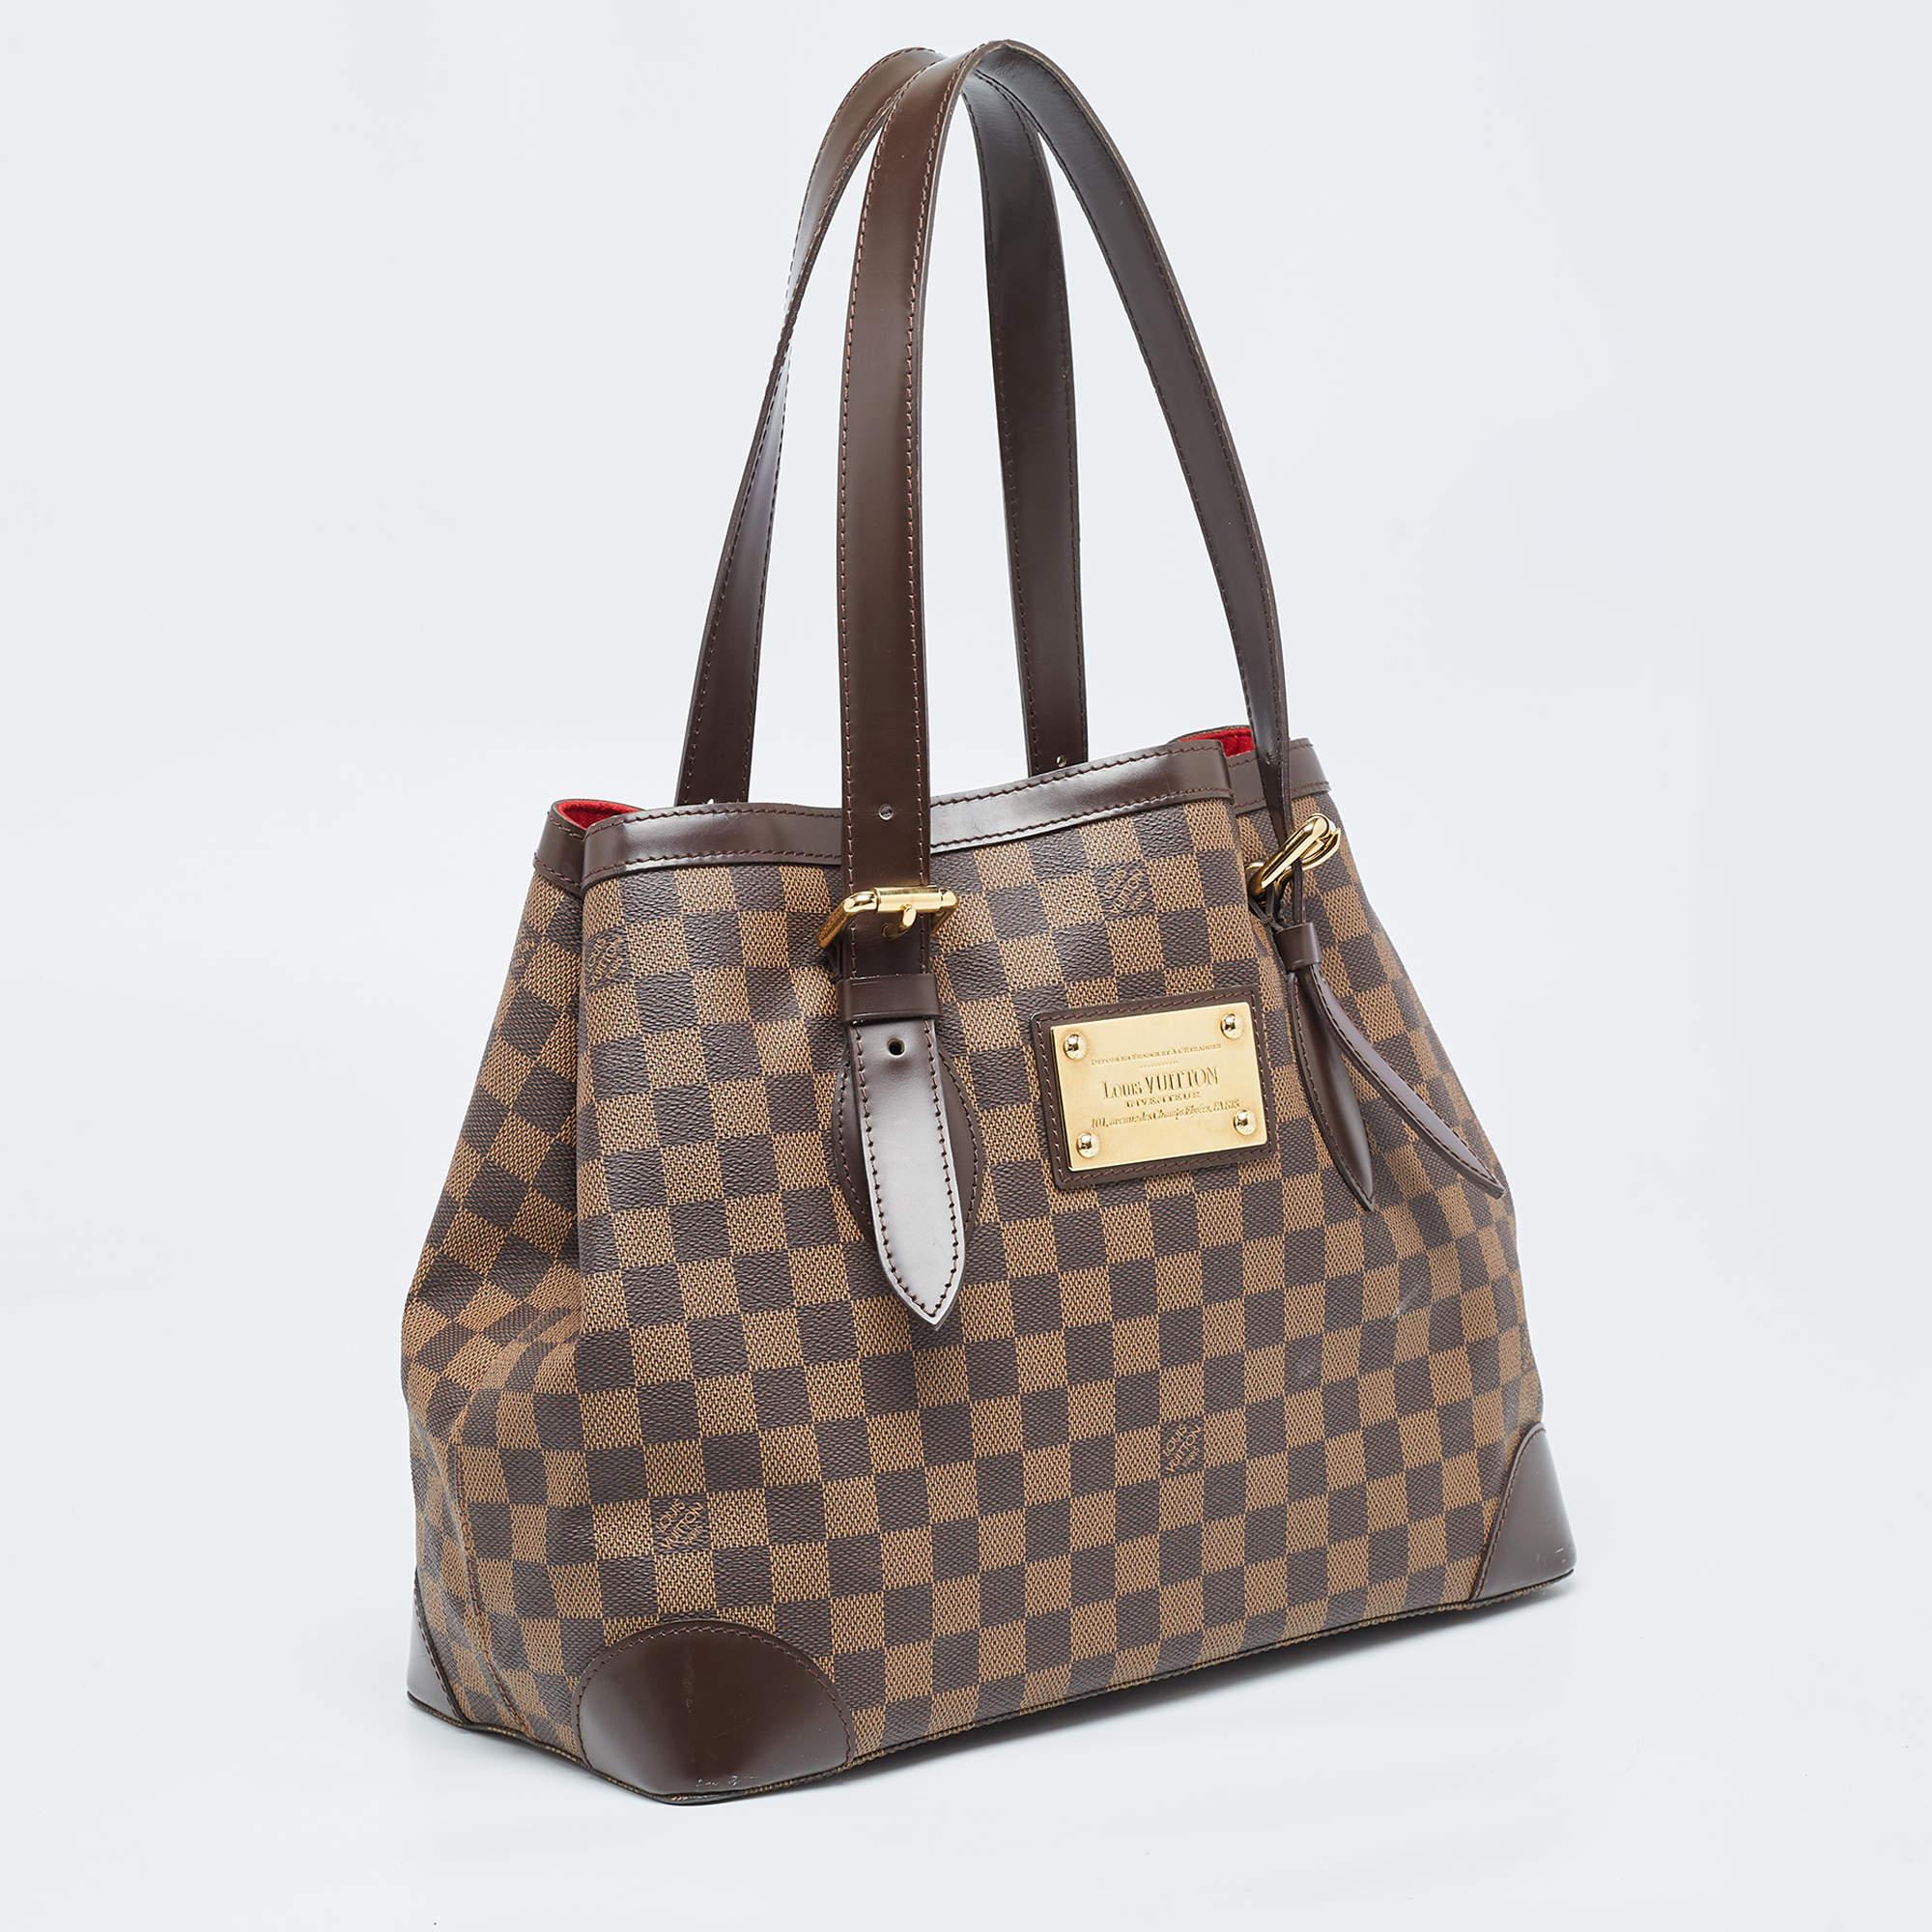 Handbags from Louis Vuitton enjoy widespread popularity owing to their high style and functionality. This Hampstead bag is no exception. Crafted from their signature Damier Ebene canvas, the bag comes with two flat top handles and a hook clasp that